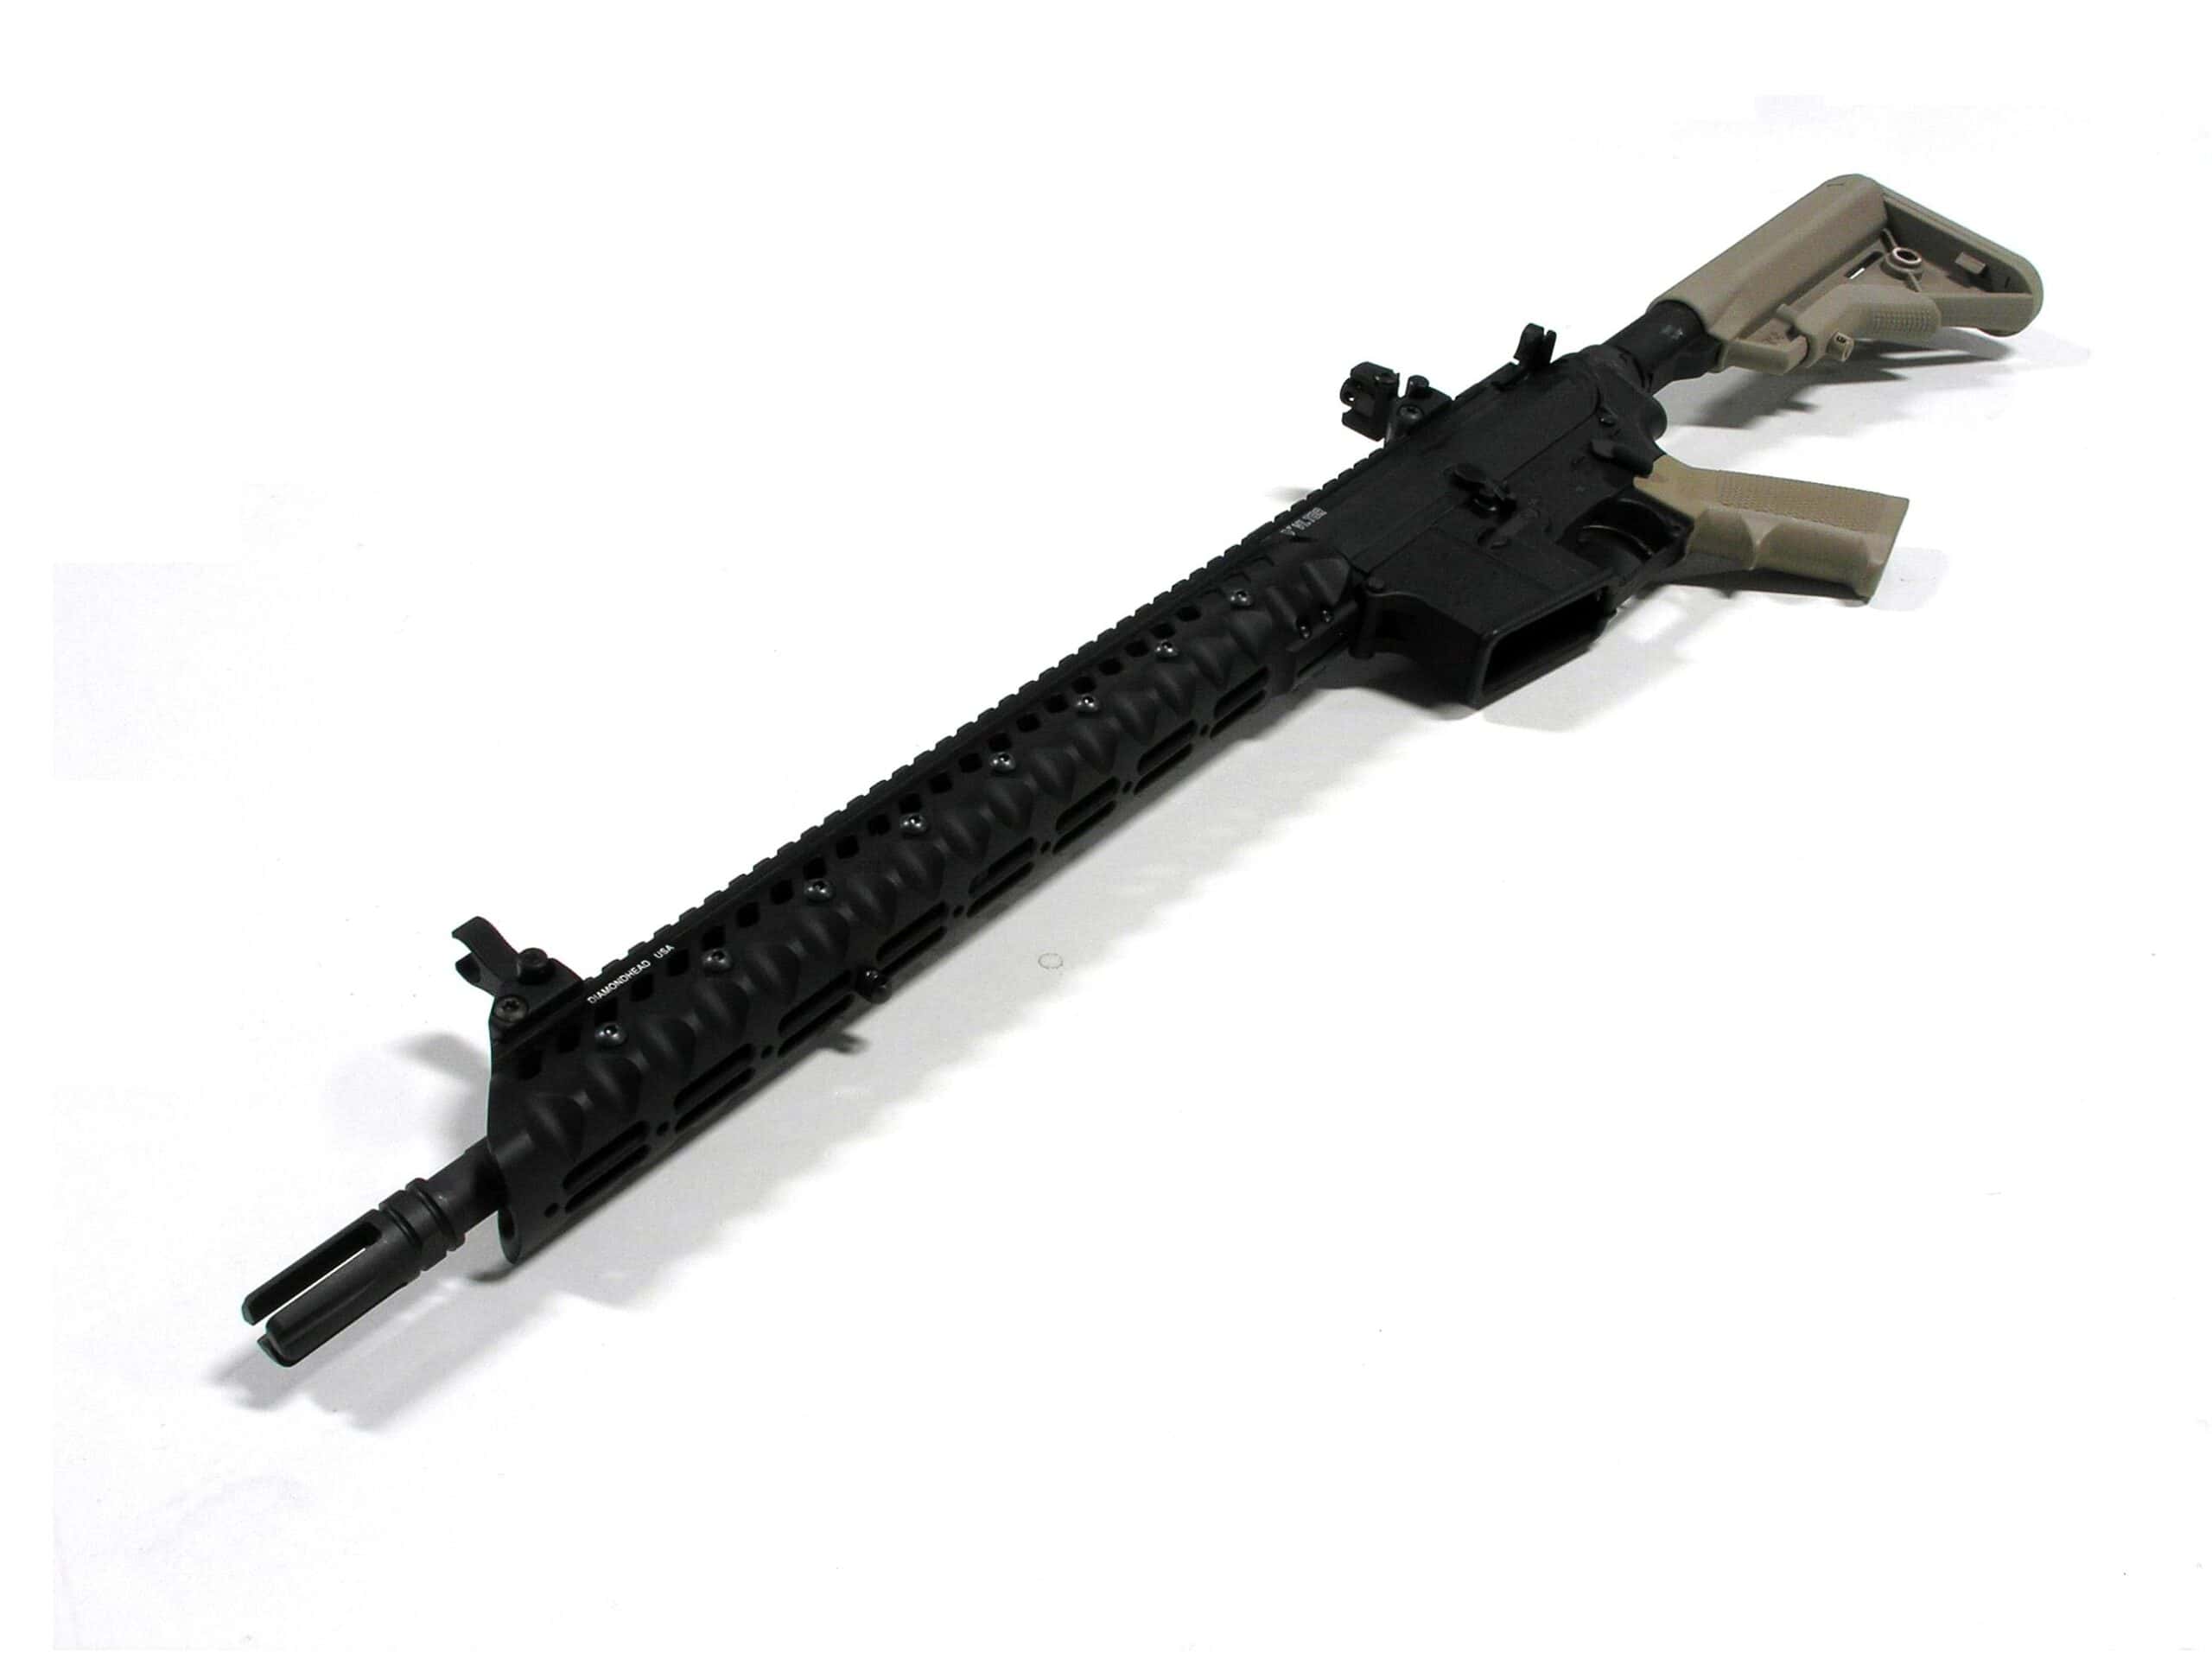 Stag+Arms+rifle | File:Extra parts carbine (18712089780).jpg